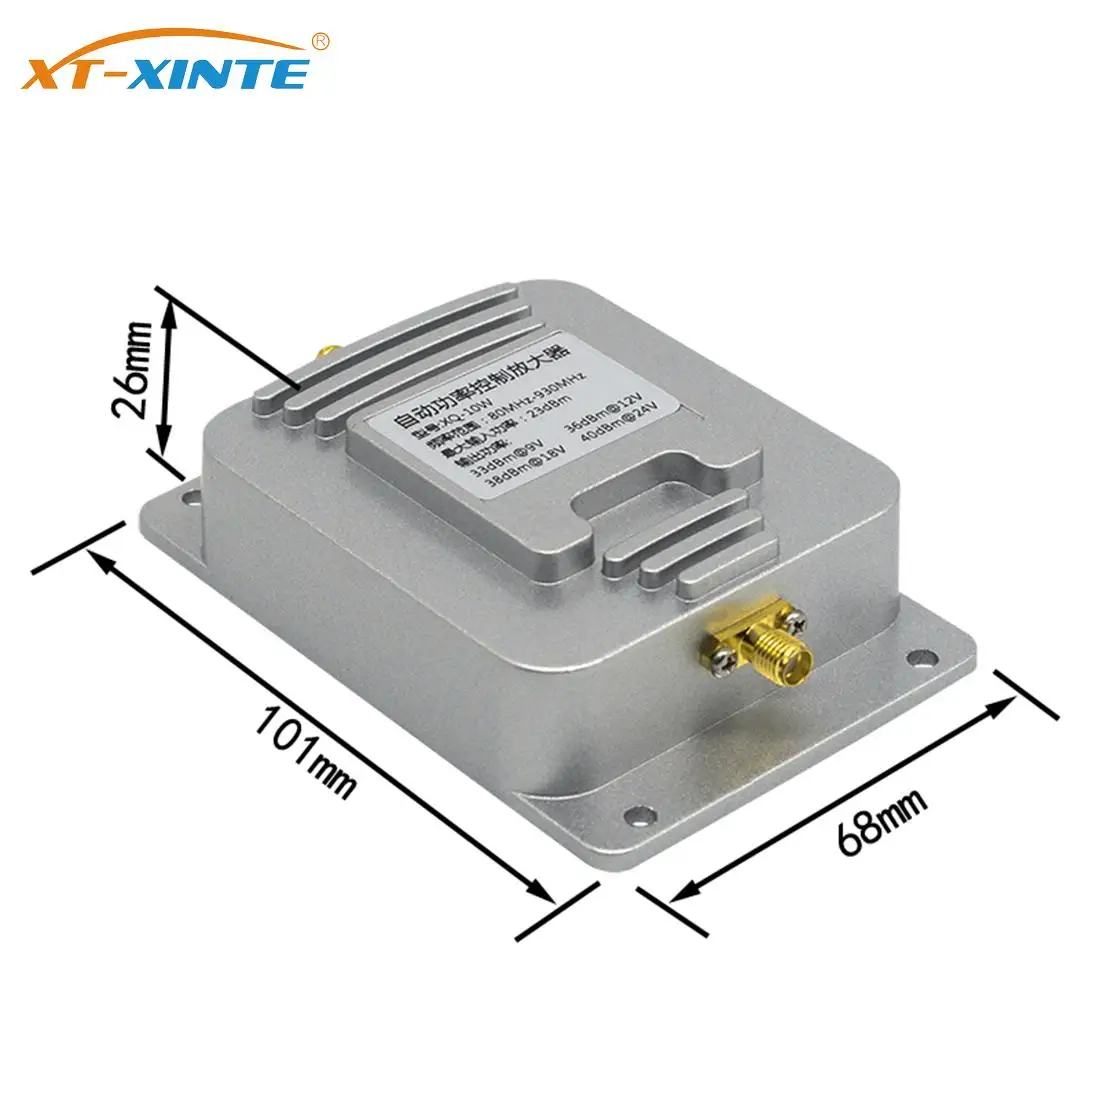 XQ-10W Ultra-wideband Automatic Power Control RF Amplifier 80MHz – 930MHz One-way Signal Amplifier for Sub-1GHz Band